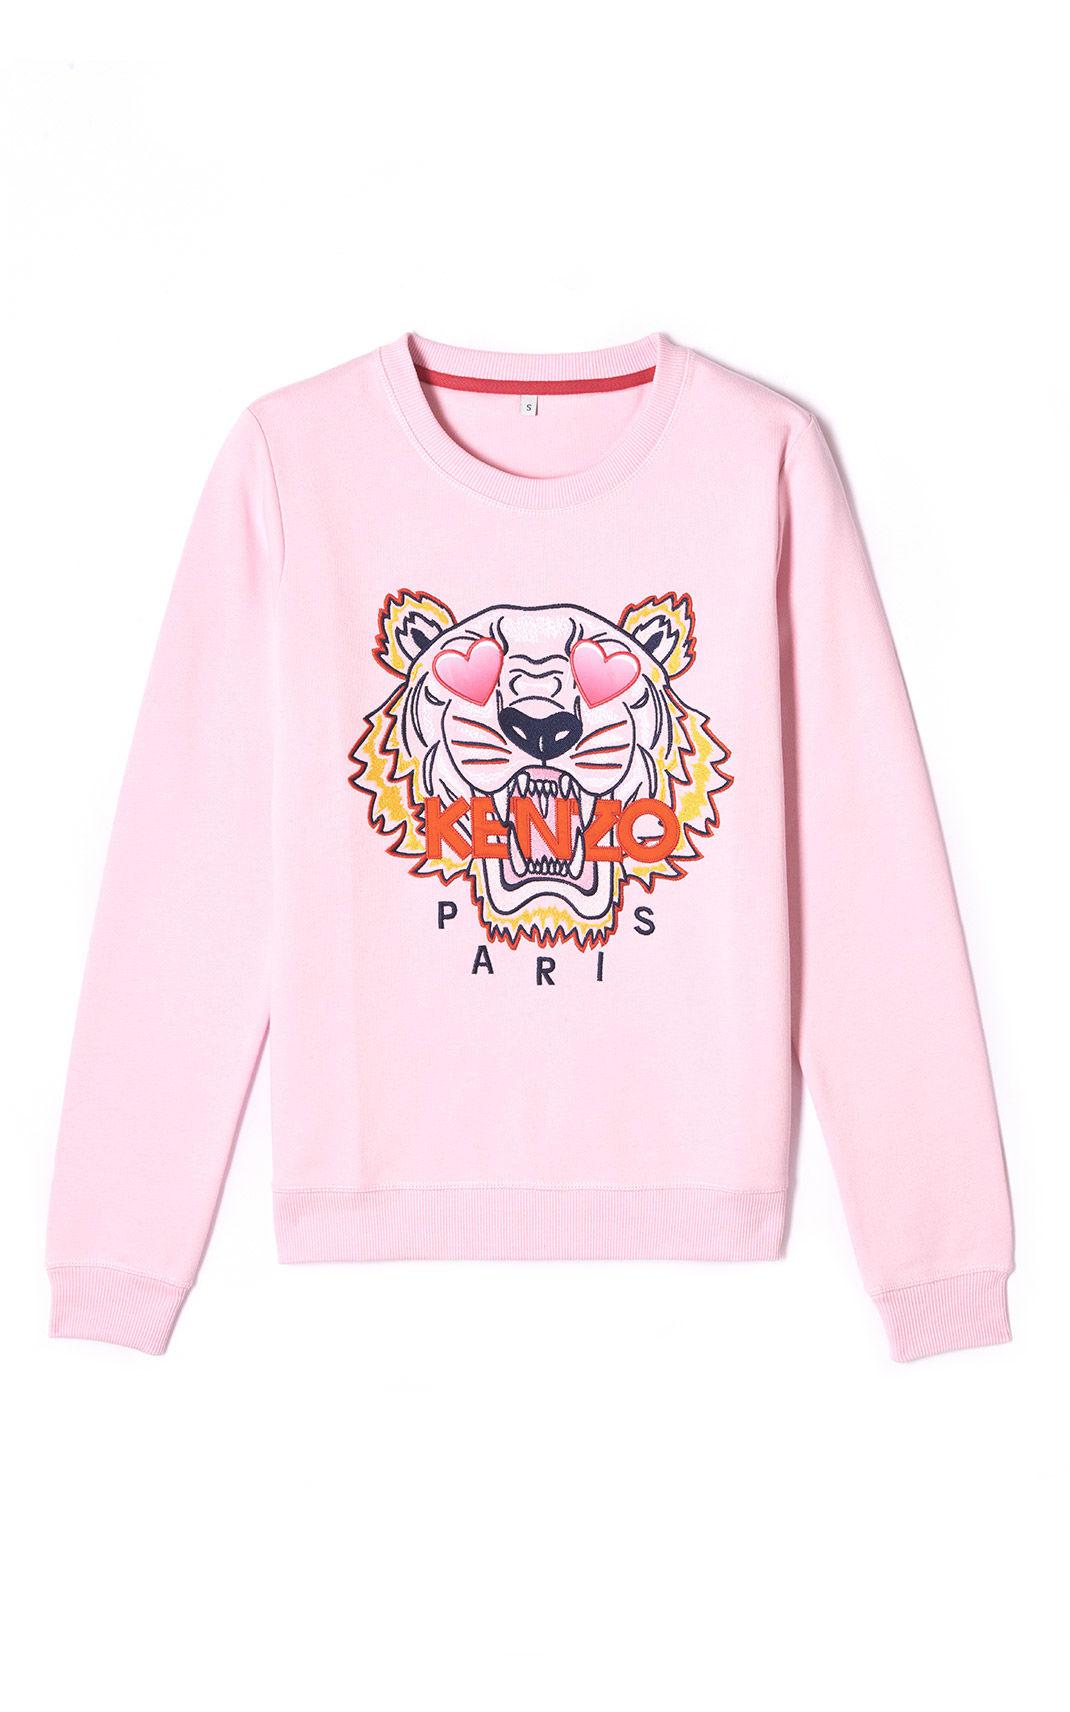 kenzo valentine's day collection - 55 